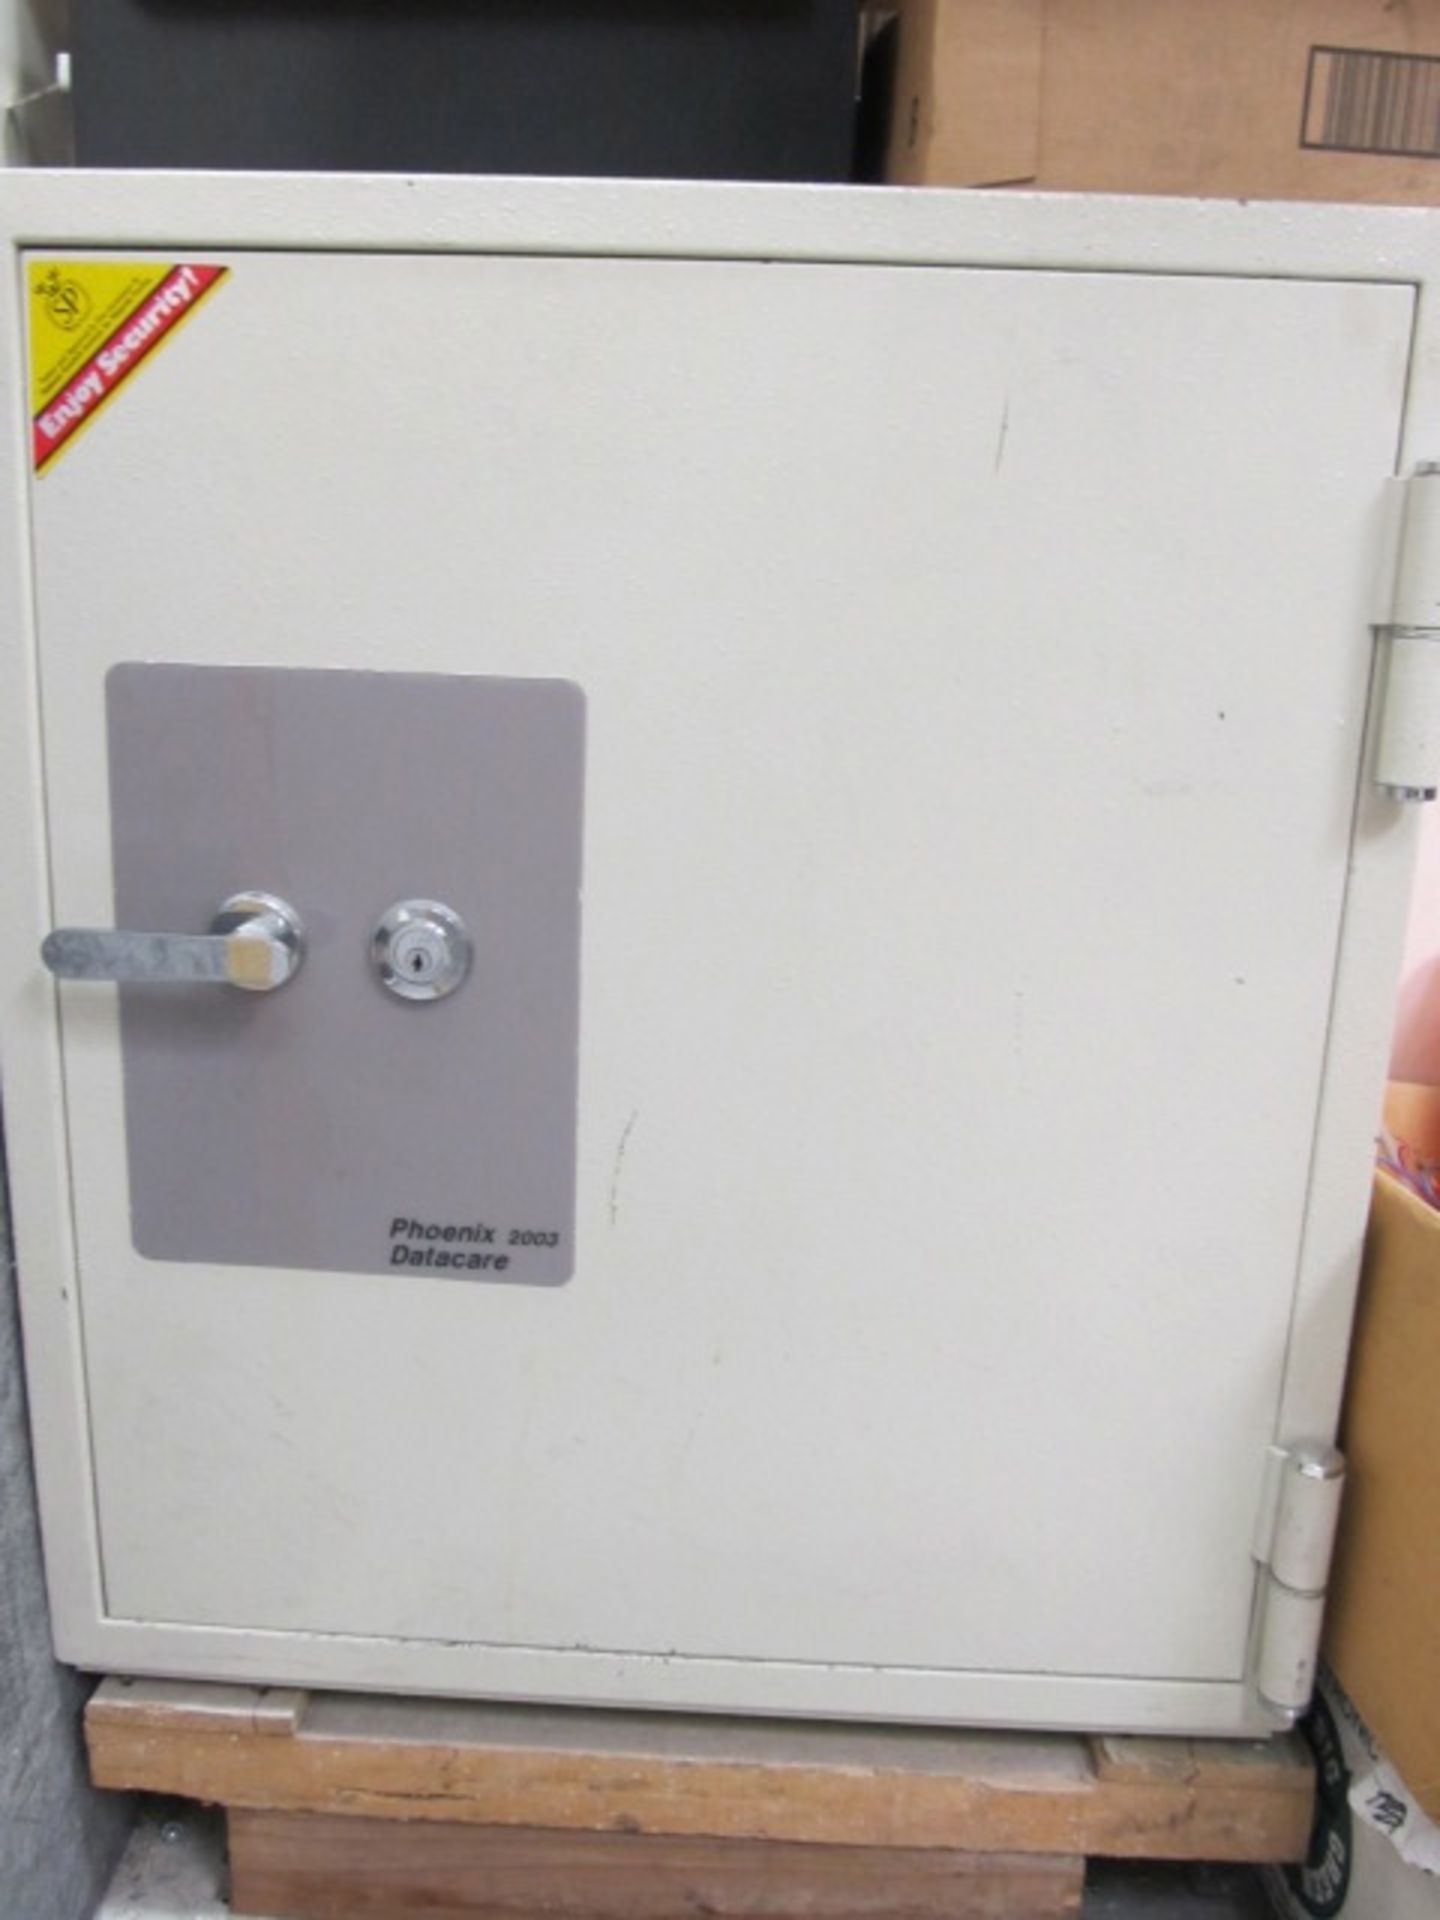 Phoenix 2003 Datacare Safe (No Key). Asset Location: Front Offices, Site Location: Mira Loma, CA